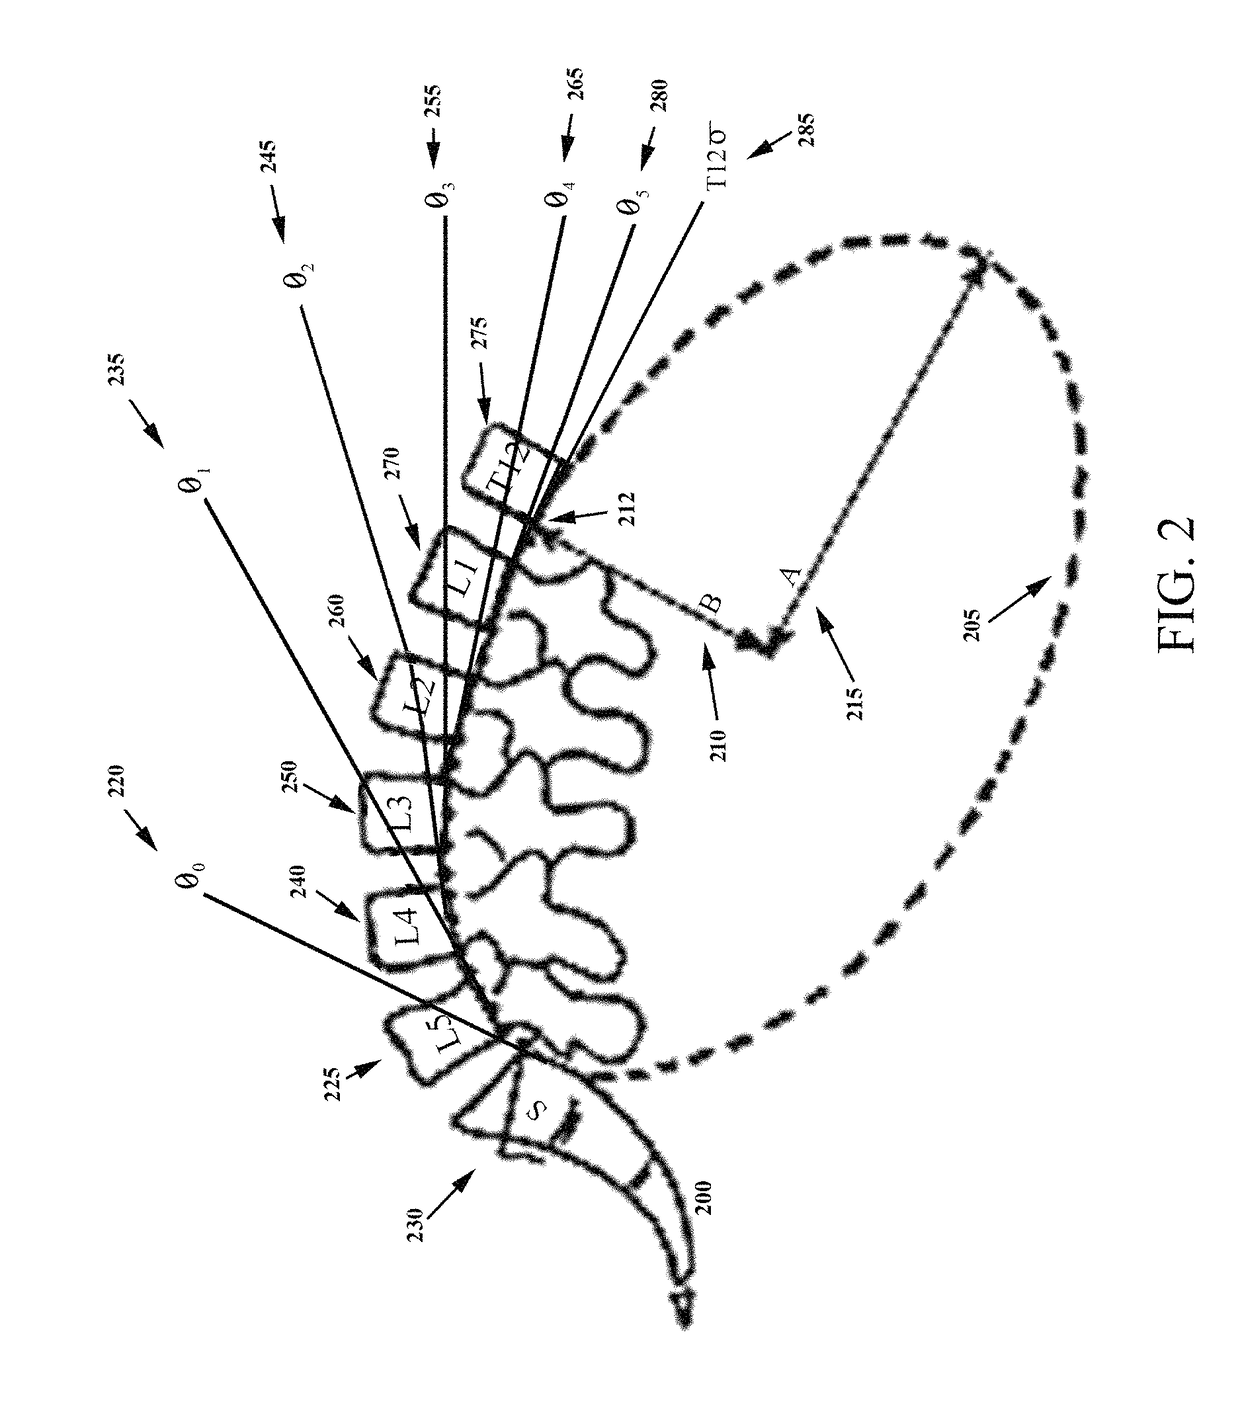 System for dynamically adjusting treatment angle under tension to accommodate variations in spinal morphology